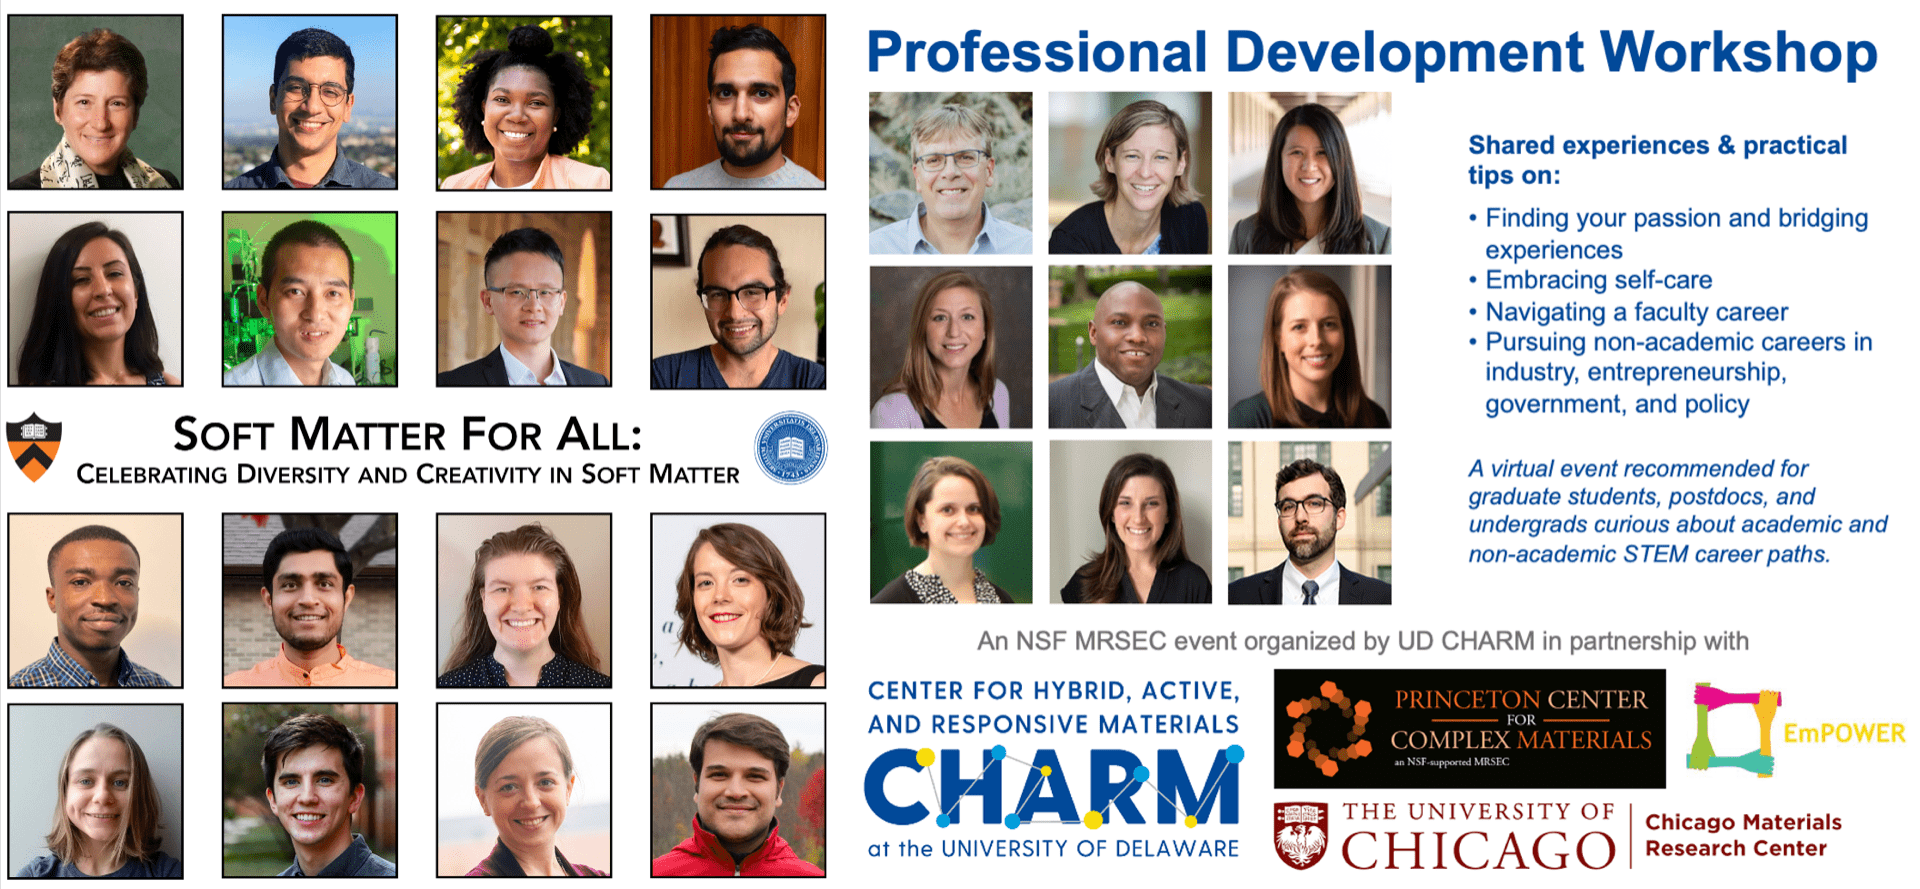 Collage of Speakers for the 2021 Soft Matter for All Symposium and Professional Development Workshop